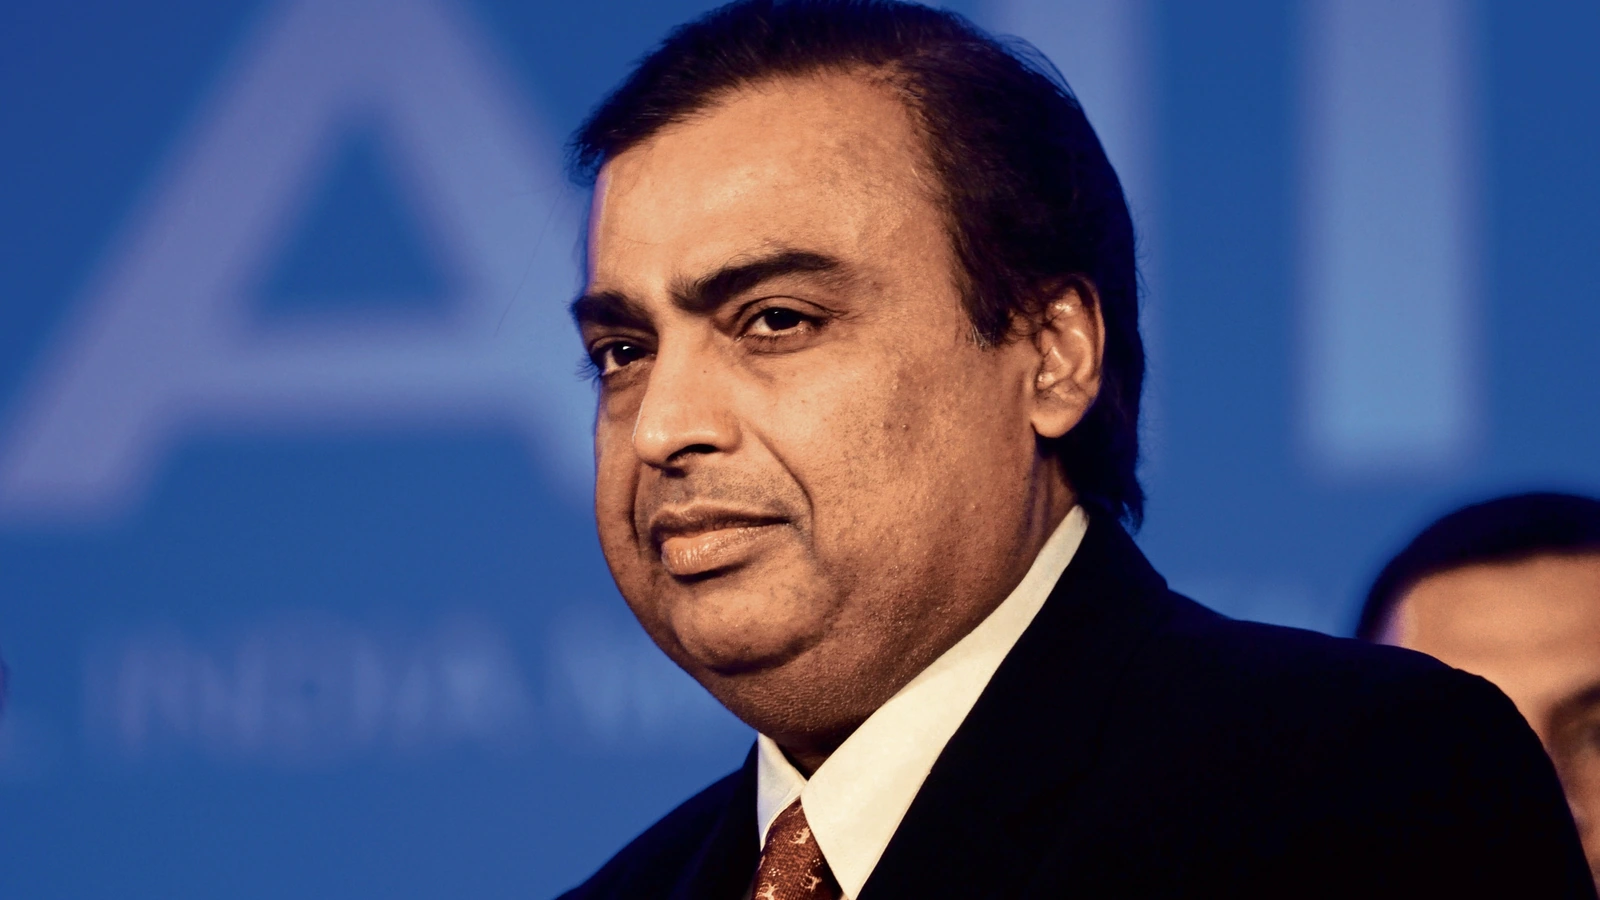 Reliance takes control of Future Retail stores, including Big Bazaar